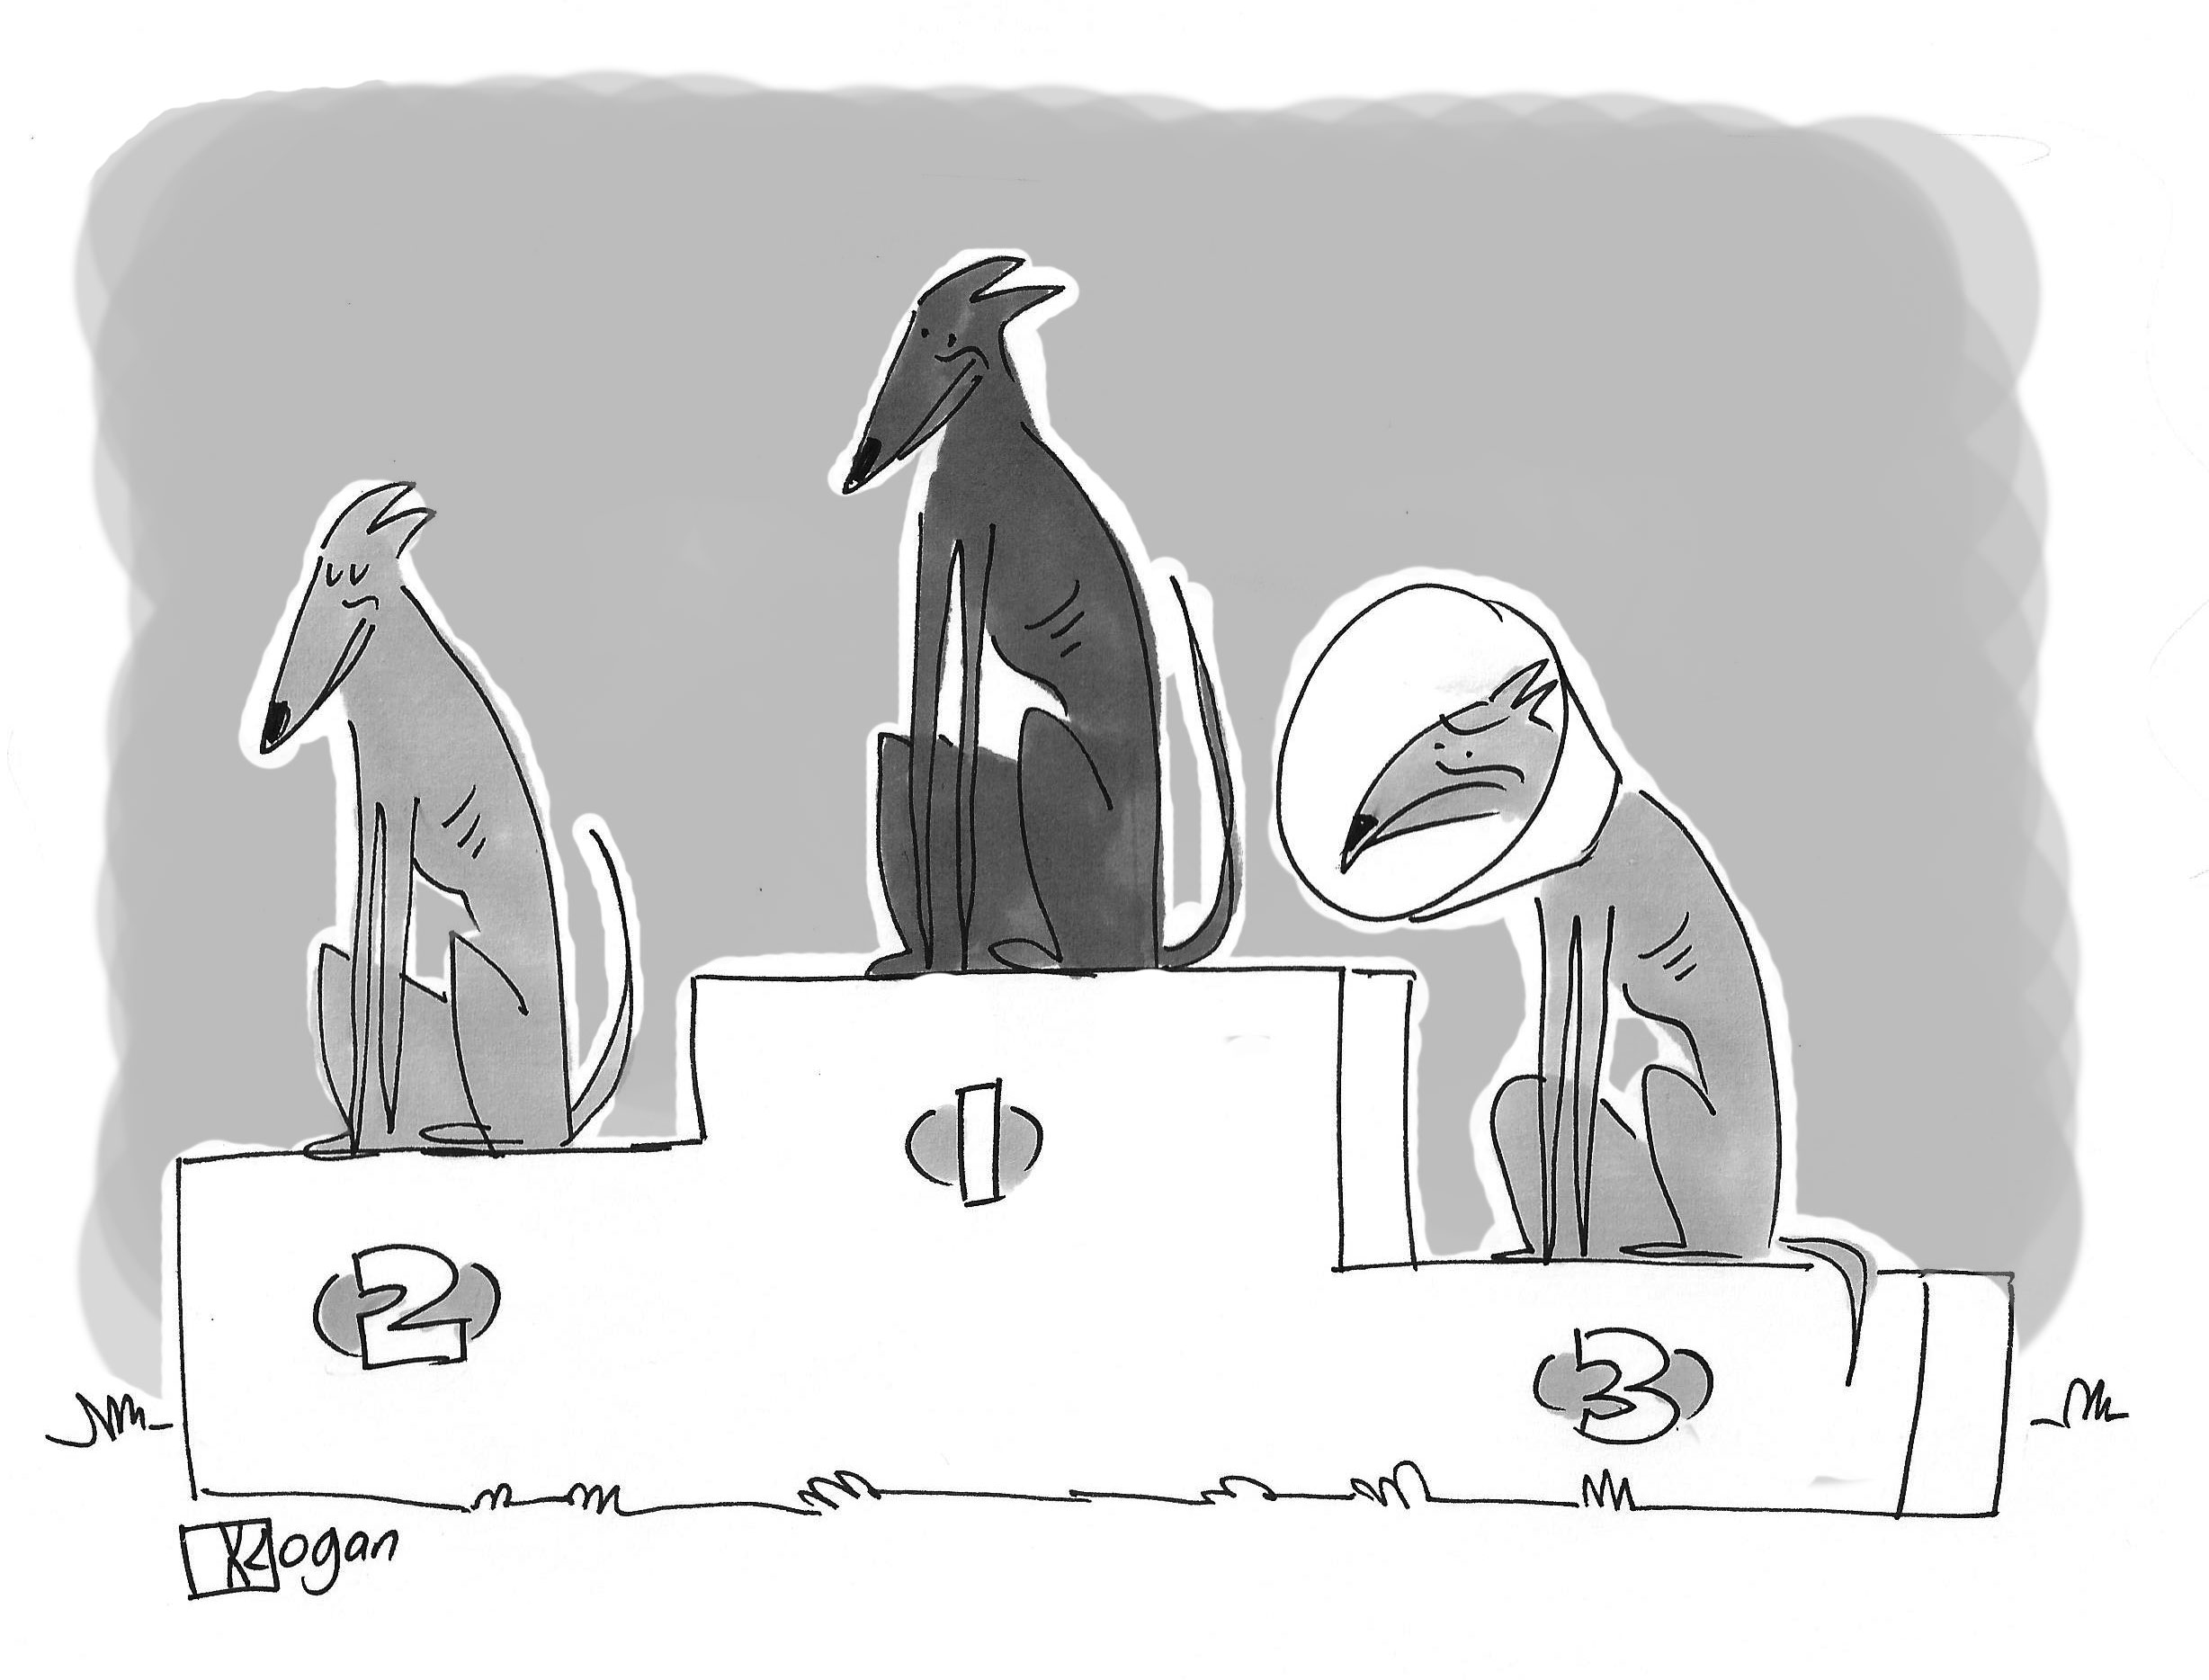 Cartoon about placing third place.